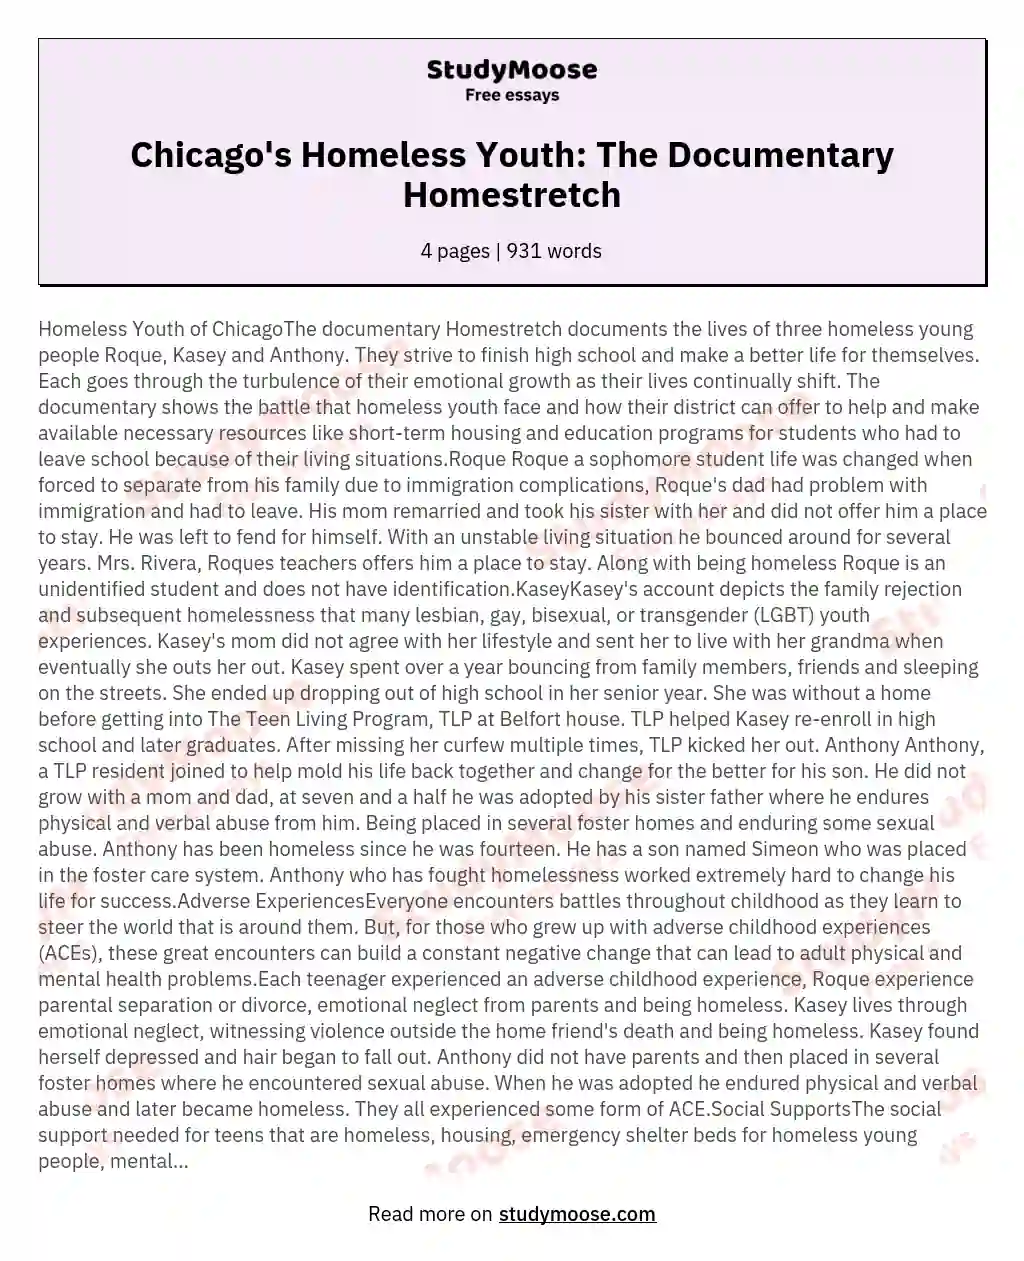 Chicago's Homeless Youth: The Documentary Homestretch essay